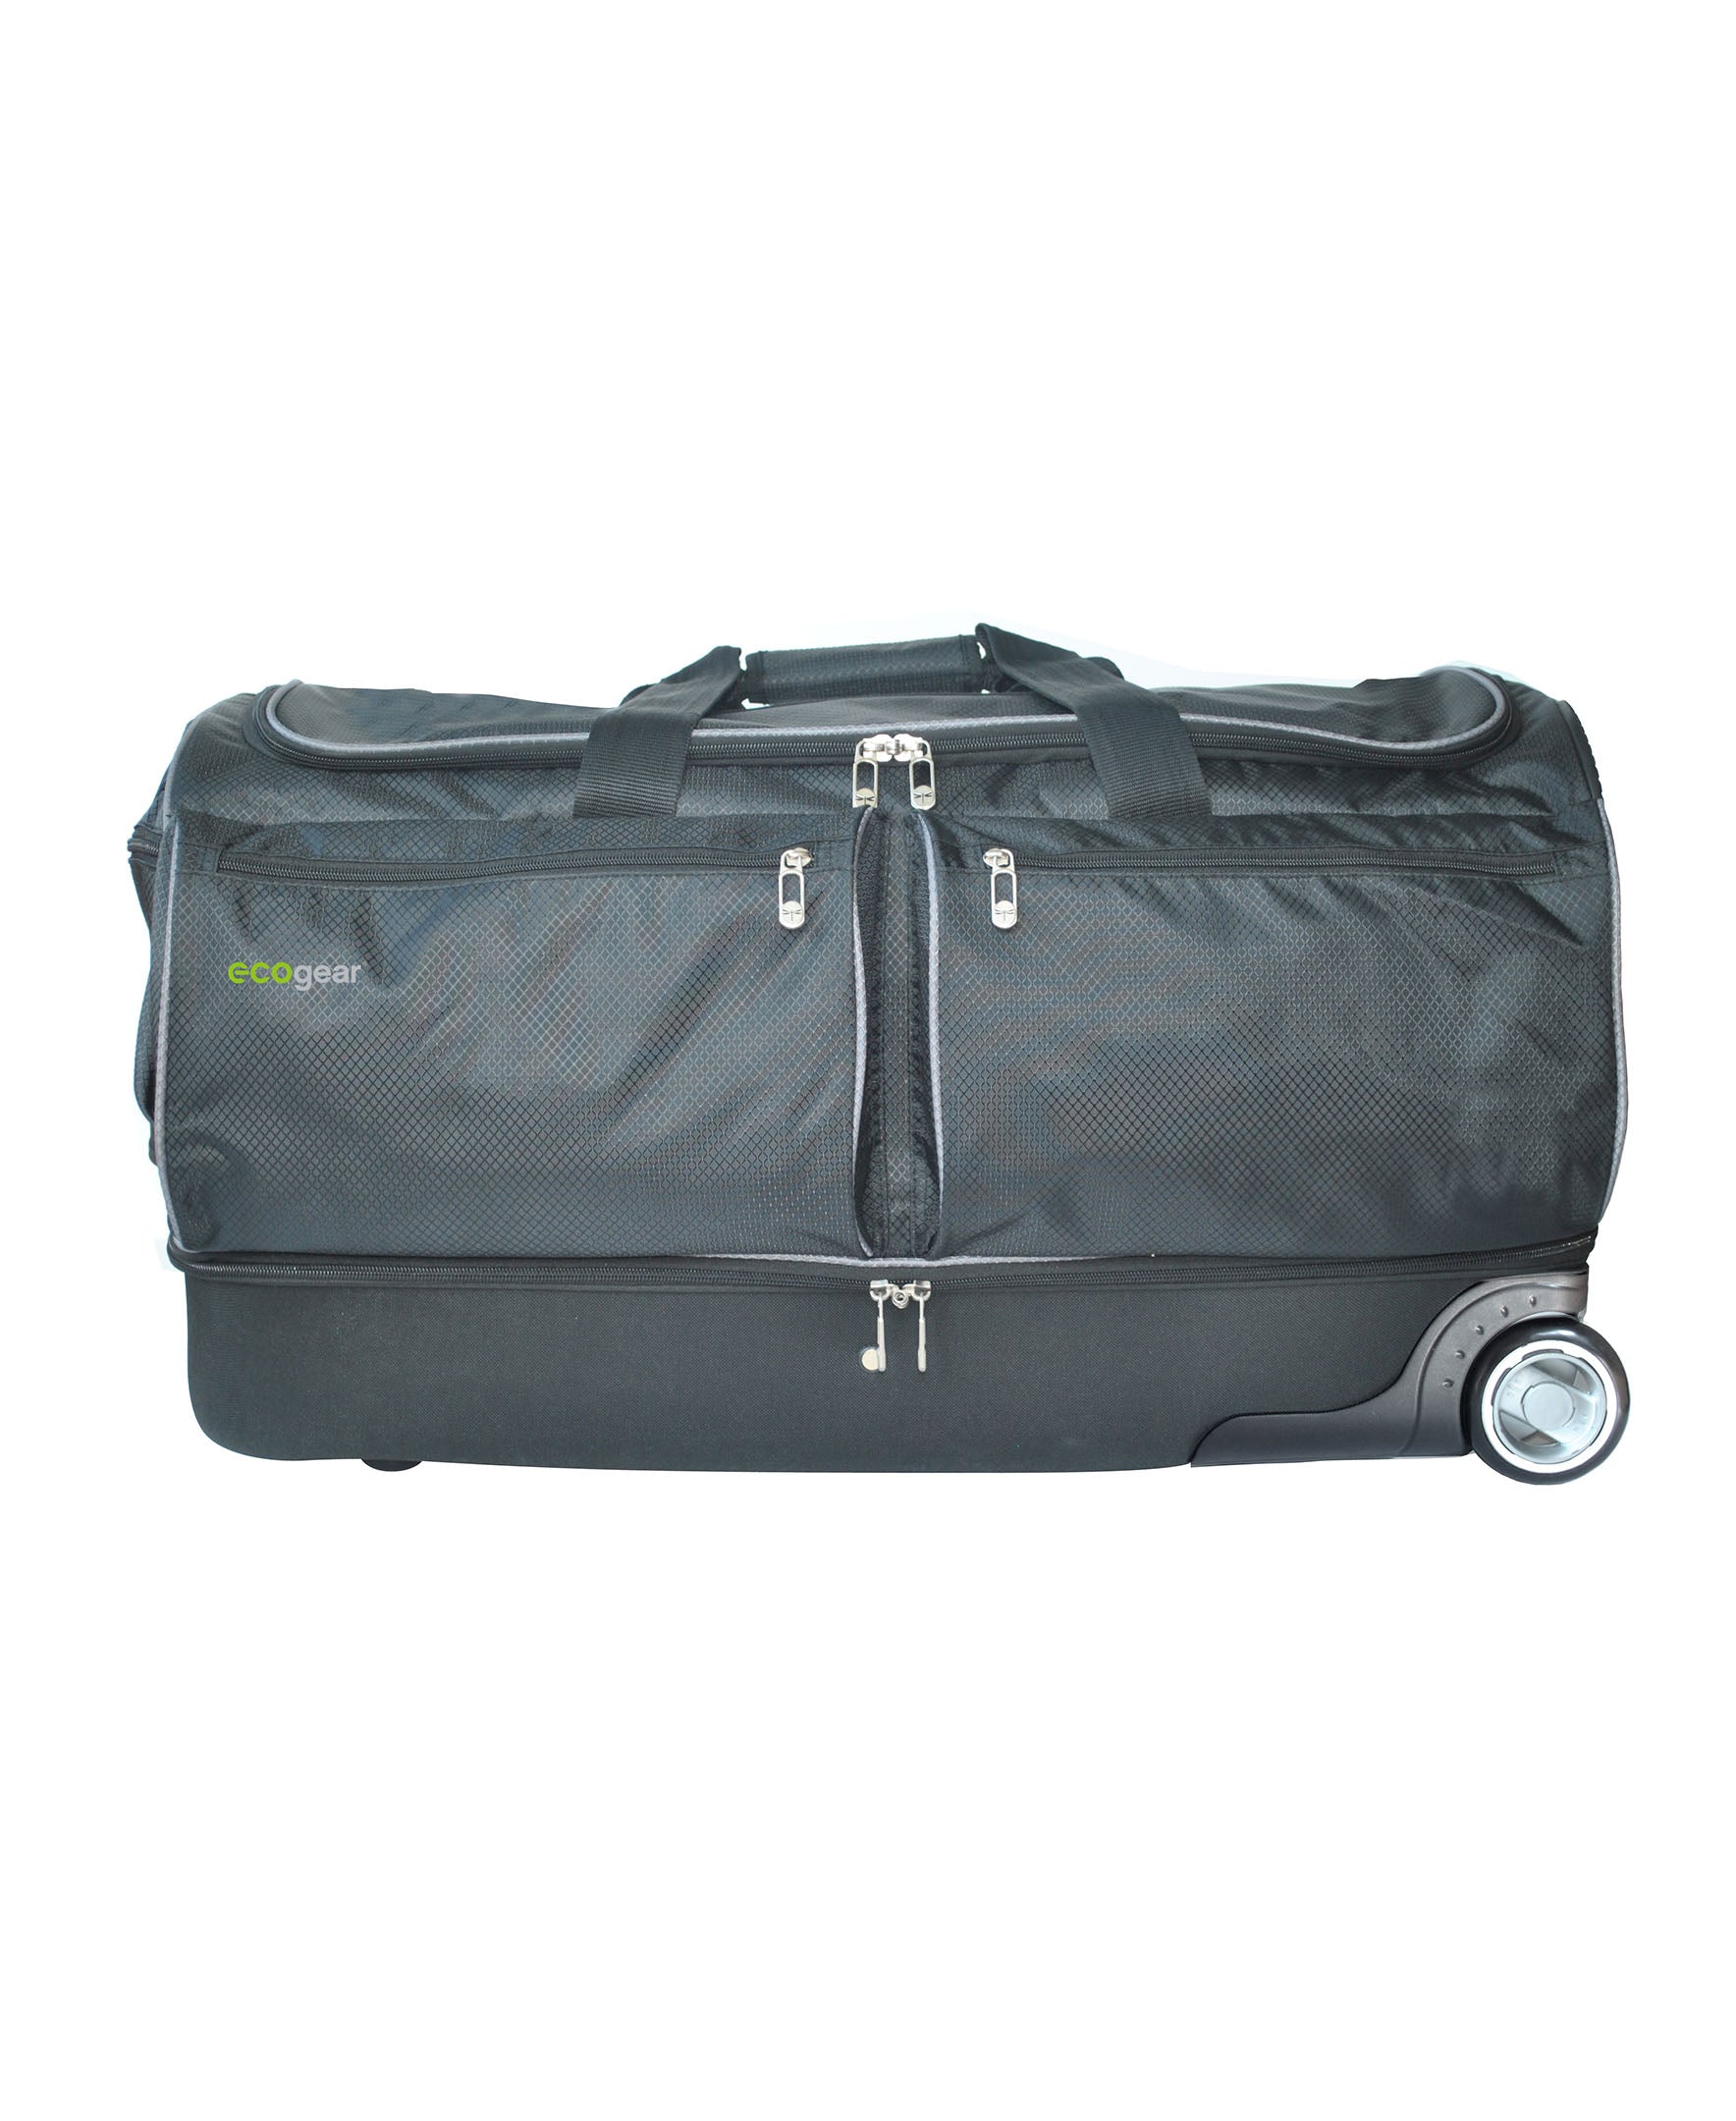 Dance Competition Duffel